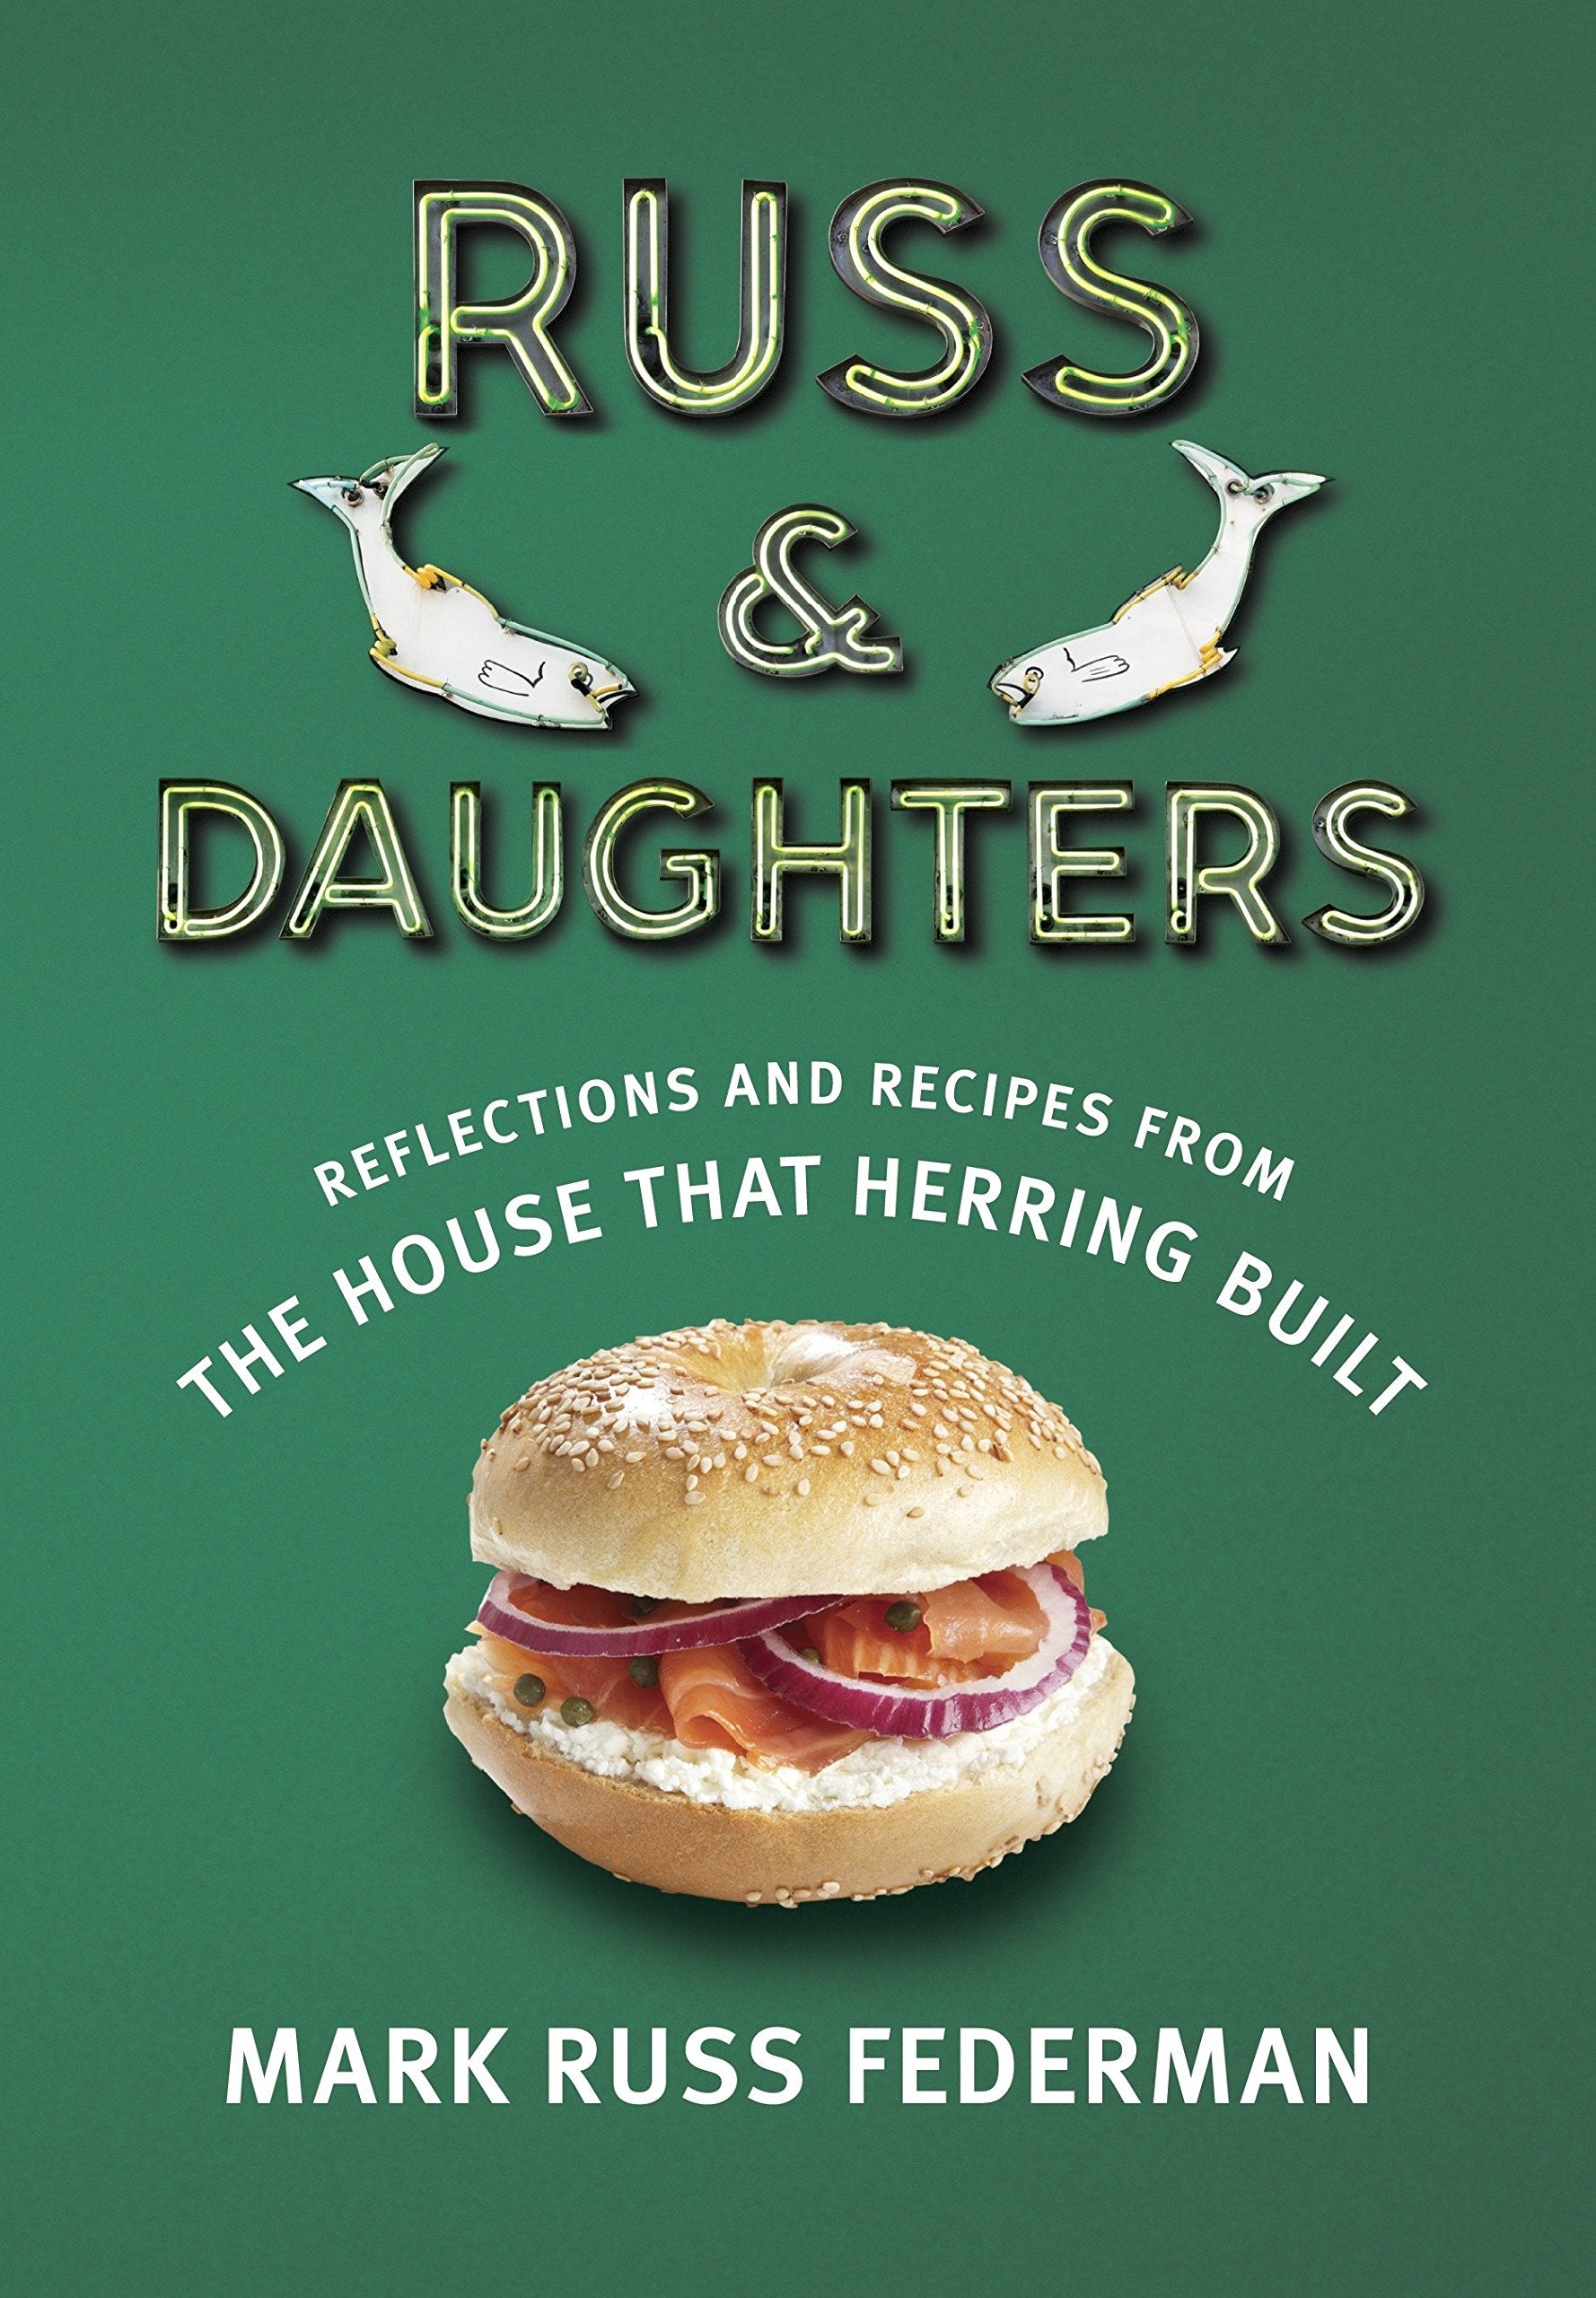 Russ & Daughters: Reflections and Recipes from the House That Herring Built (Mark Russ Federman)